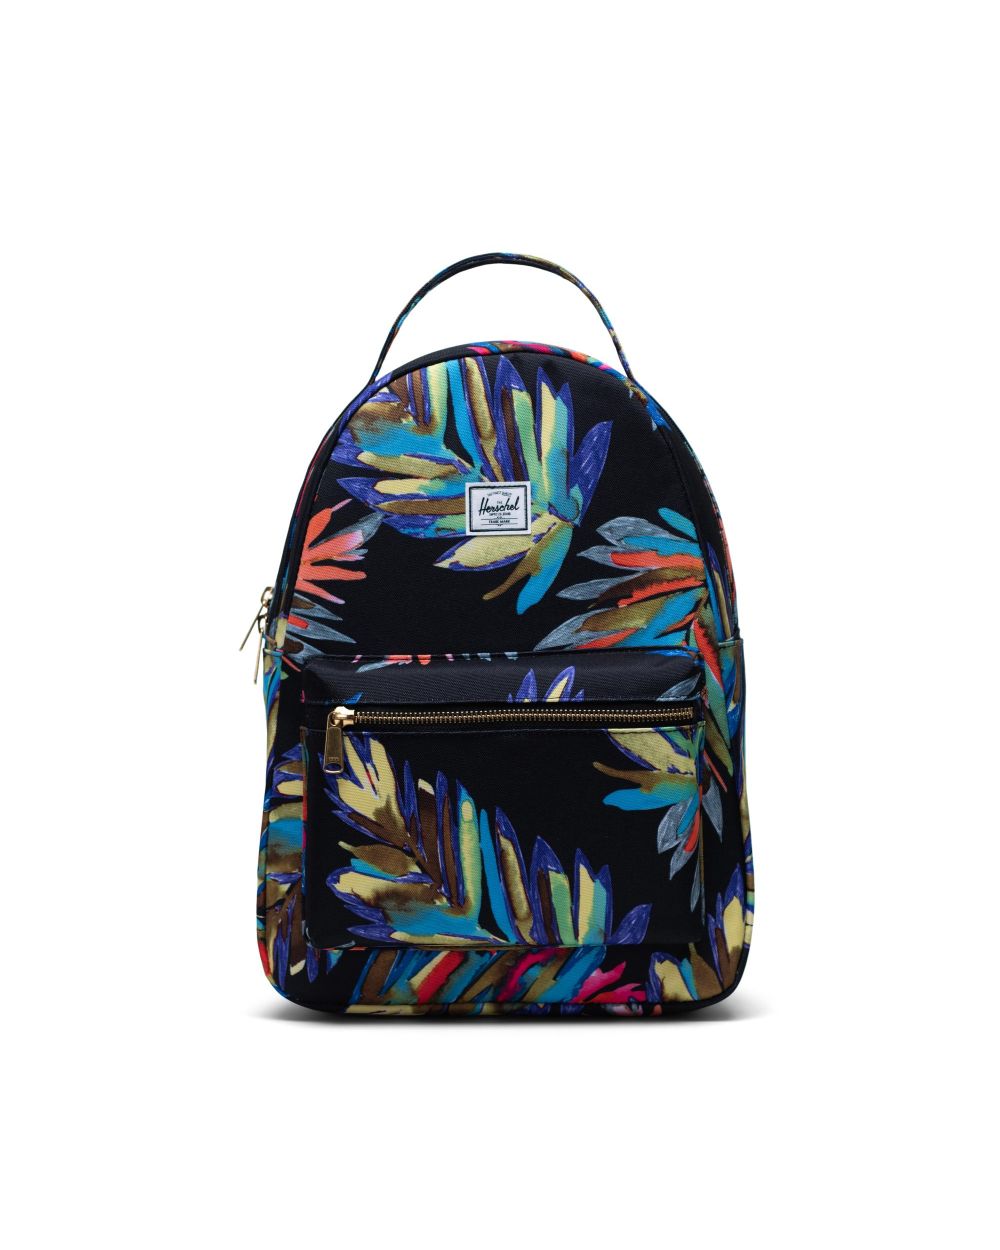 Bags | Up to 50% Off Sale | Herschel Supply Co.